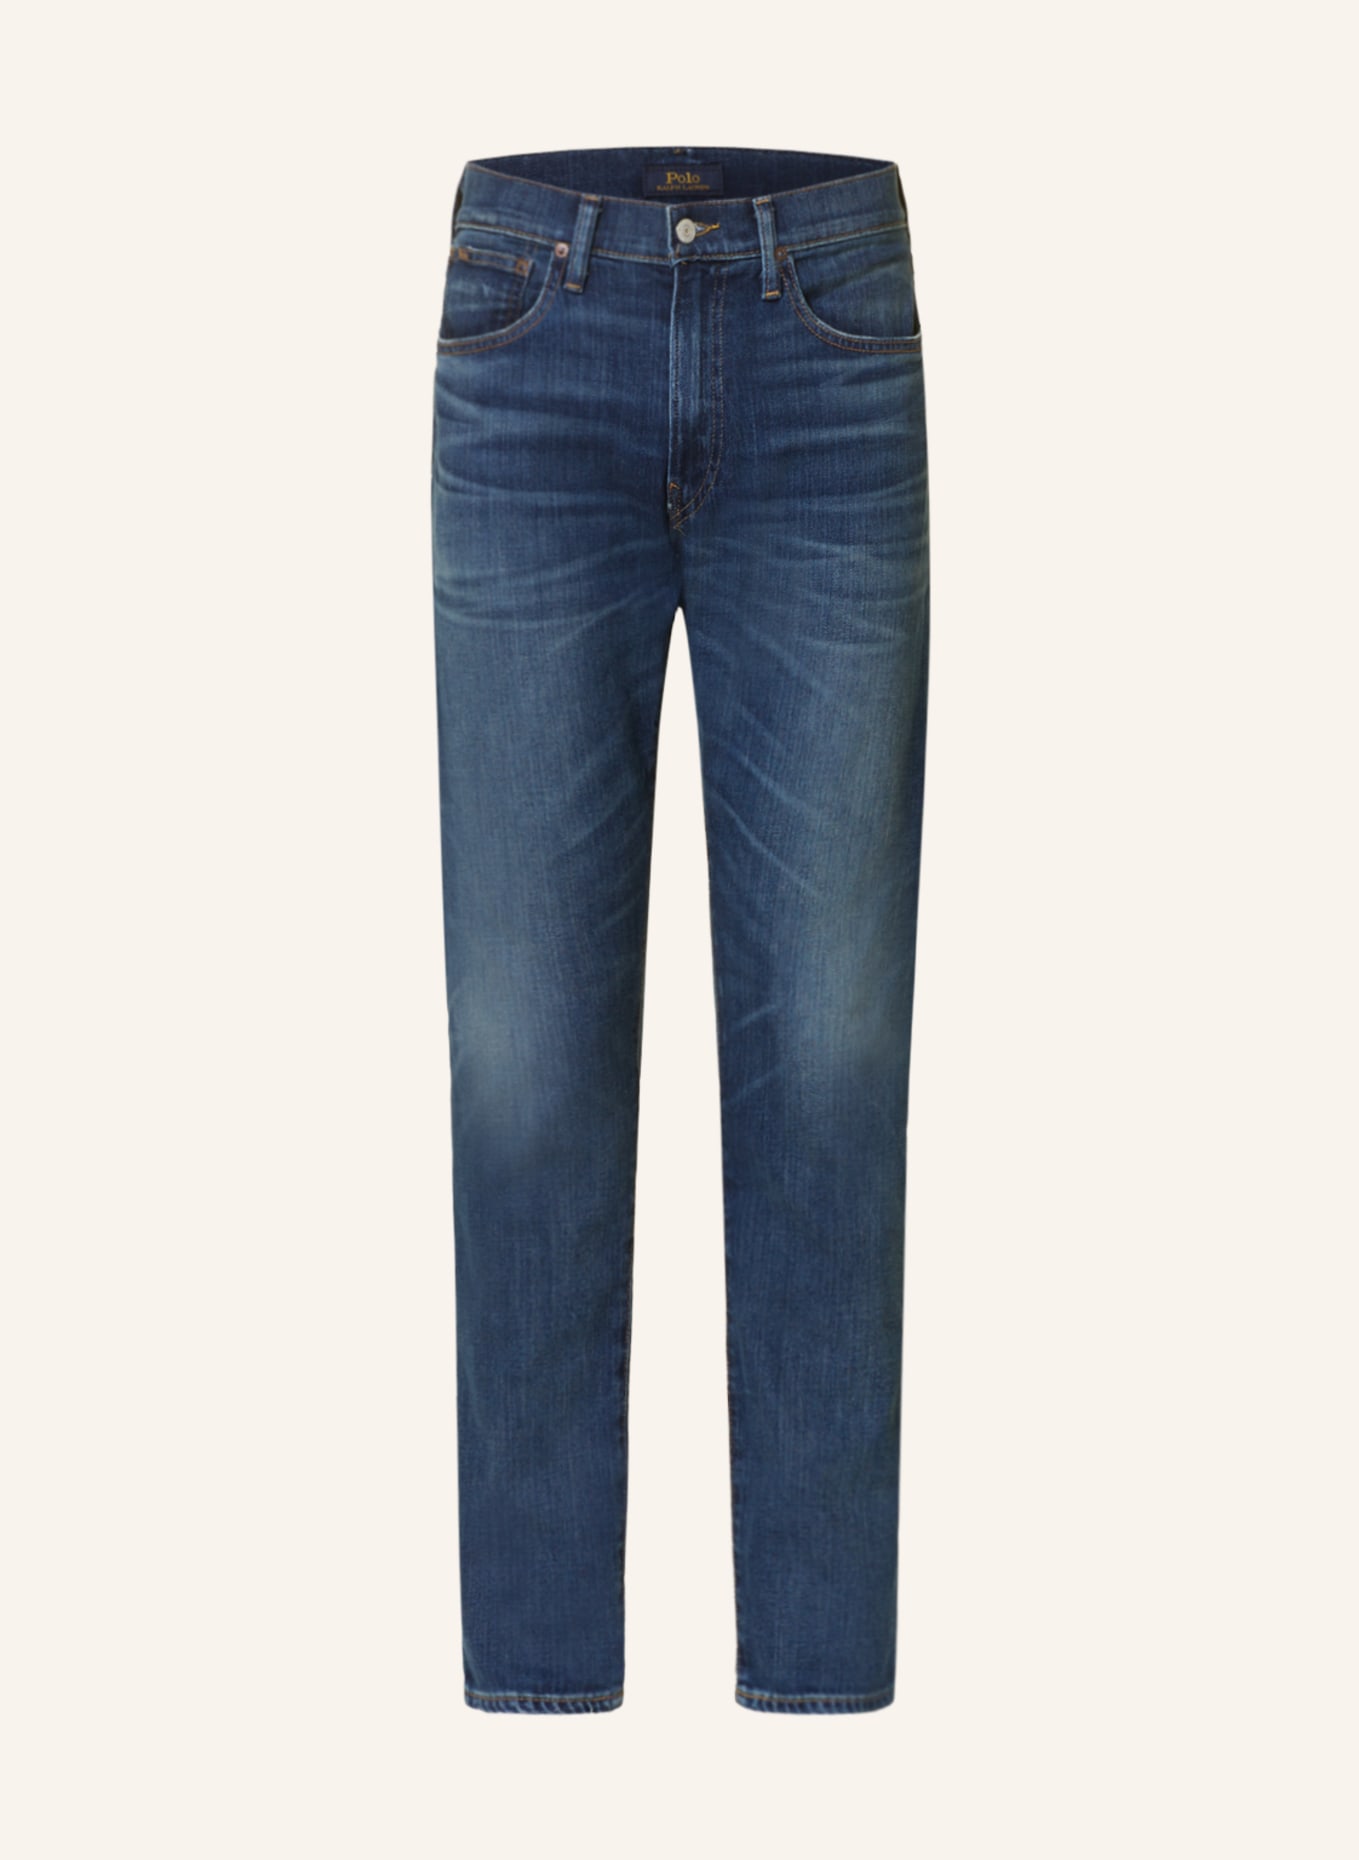 POLO RALPH LAUREN Jeans THE PARKSIDE ACTIVE Tapered Fit, Farbe: 001 WARRENTON STRETCH (Bild 1)